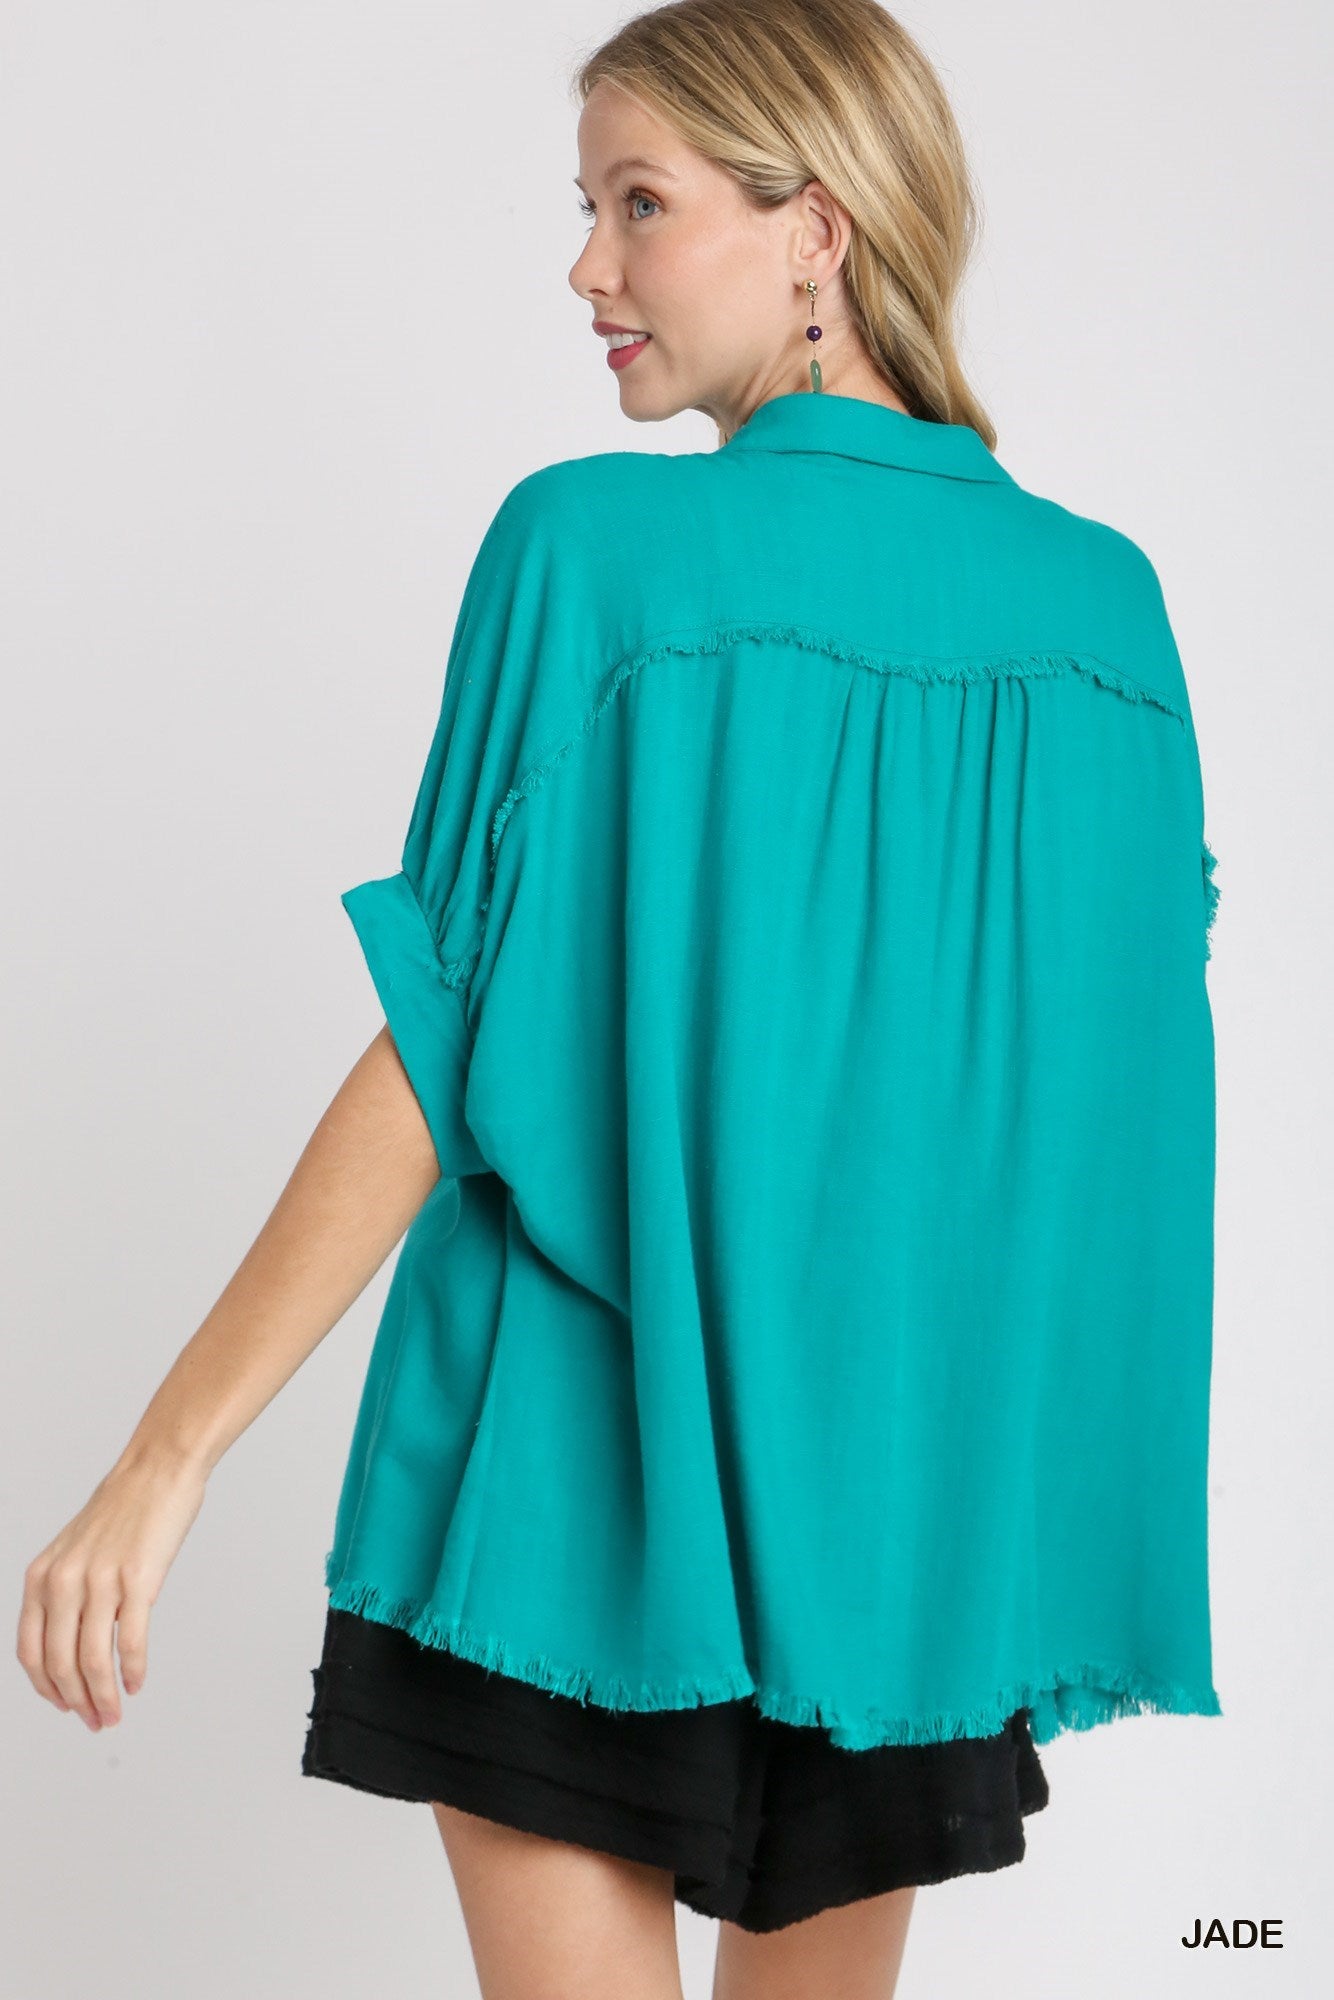 Linen Boxy Cut Top w/ Fray Details